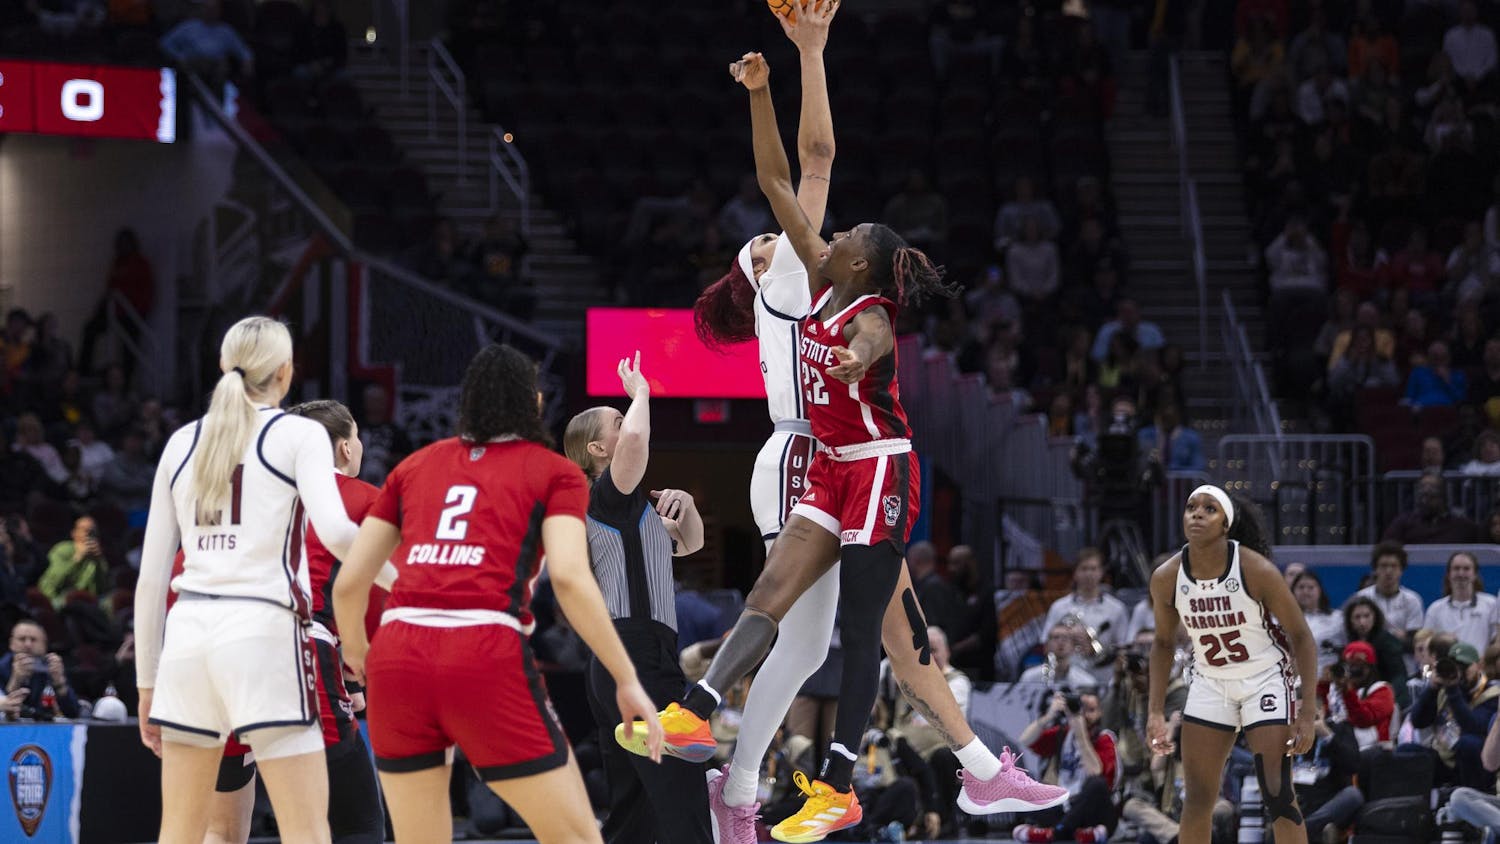 The South Carolina ɫɫƵs delivered a decisive victory to the North Carolina State Wolfpack in the first of two semifinal games at the 2024 Women’s Final Four matchup on April 5, 2024. The ɫɫƵs defeated the Wolf Pack 78-59 at Rocket Mortgage FieldHouse in Cleveland, OH.